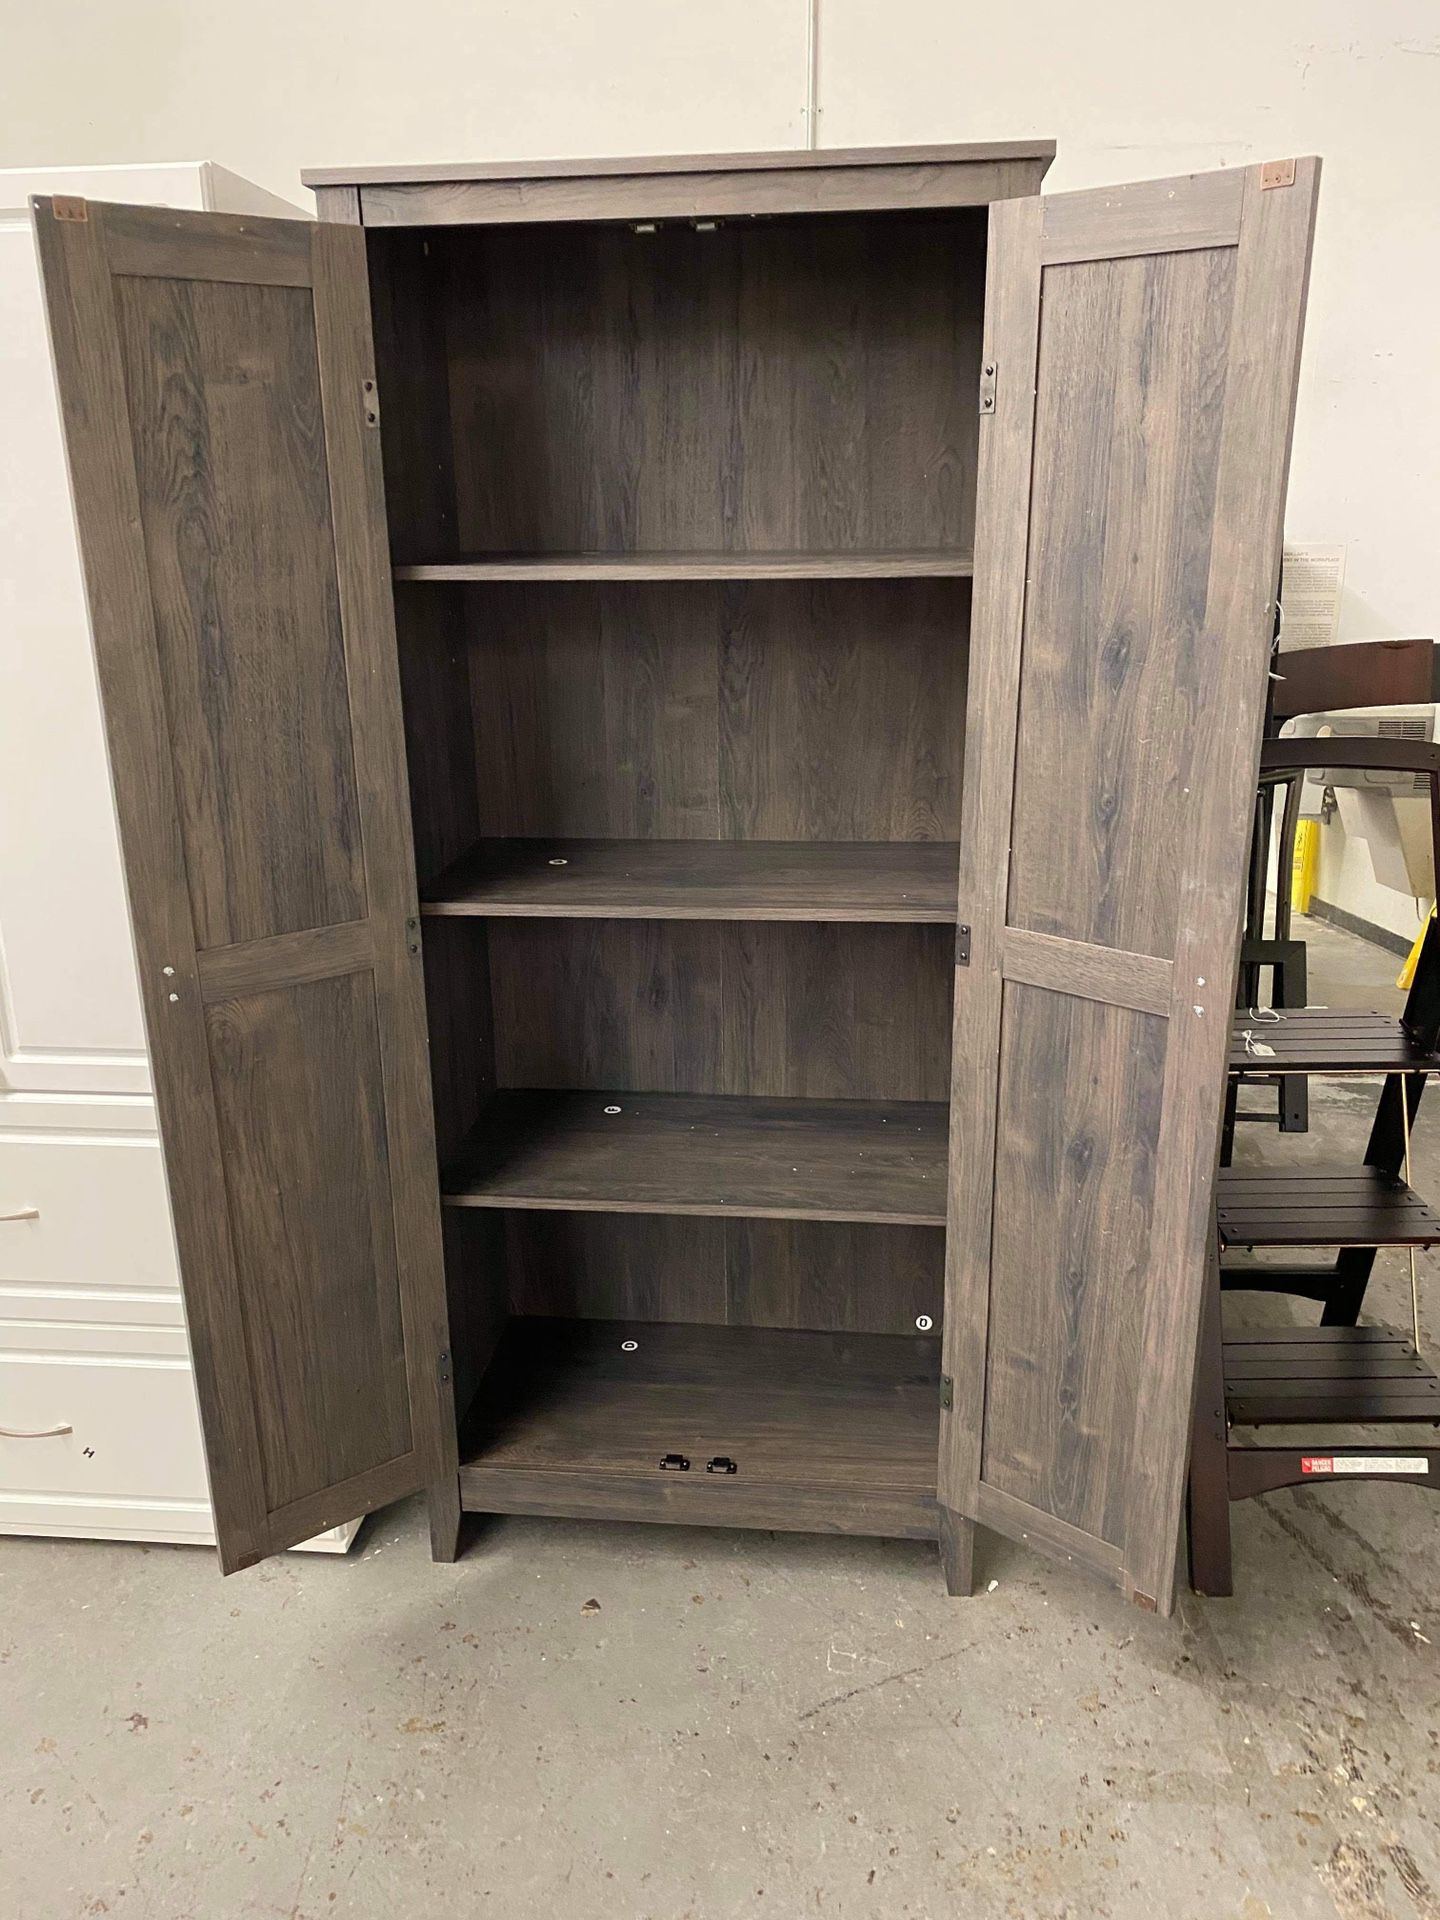 Scratch and Dent Gray Oak Farmhouse Style Tall Storage Cabinet with 2 Doors (little dent in the side) $119 AS-IS and Already Assembled TM*